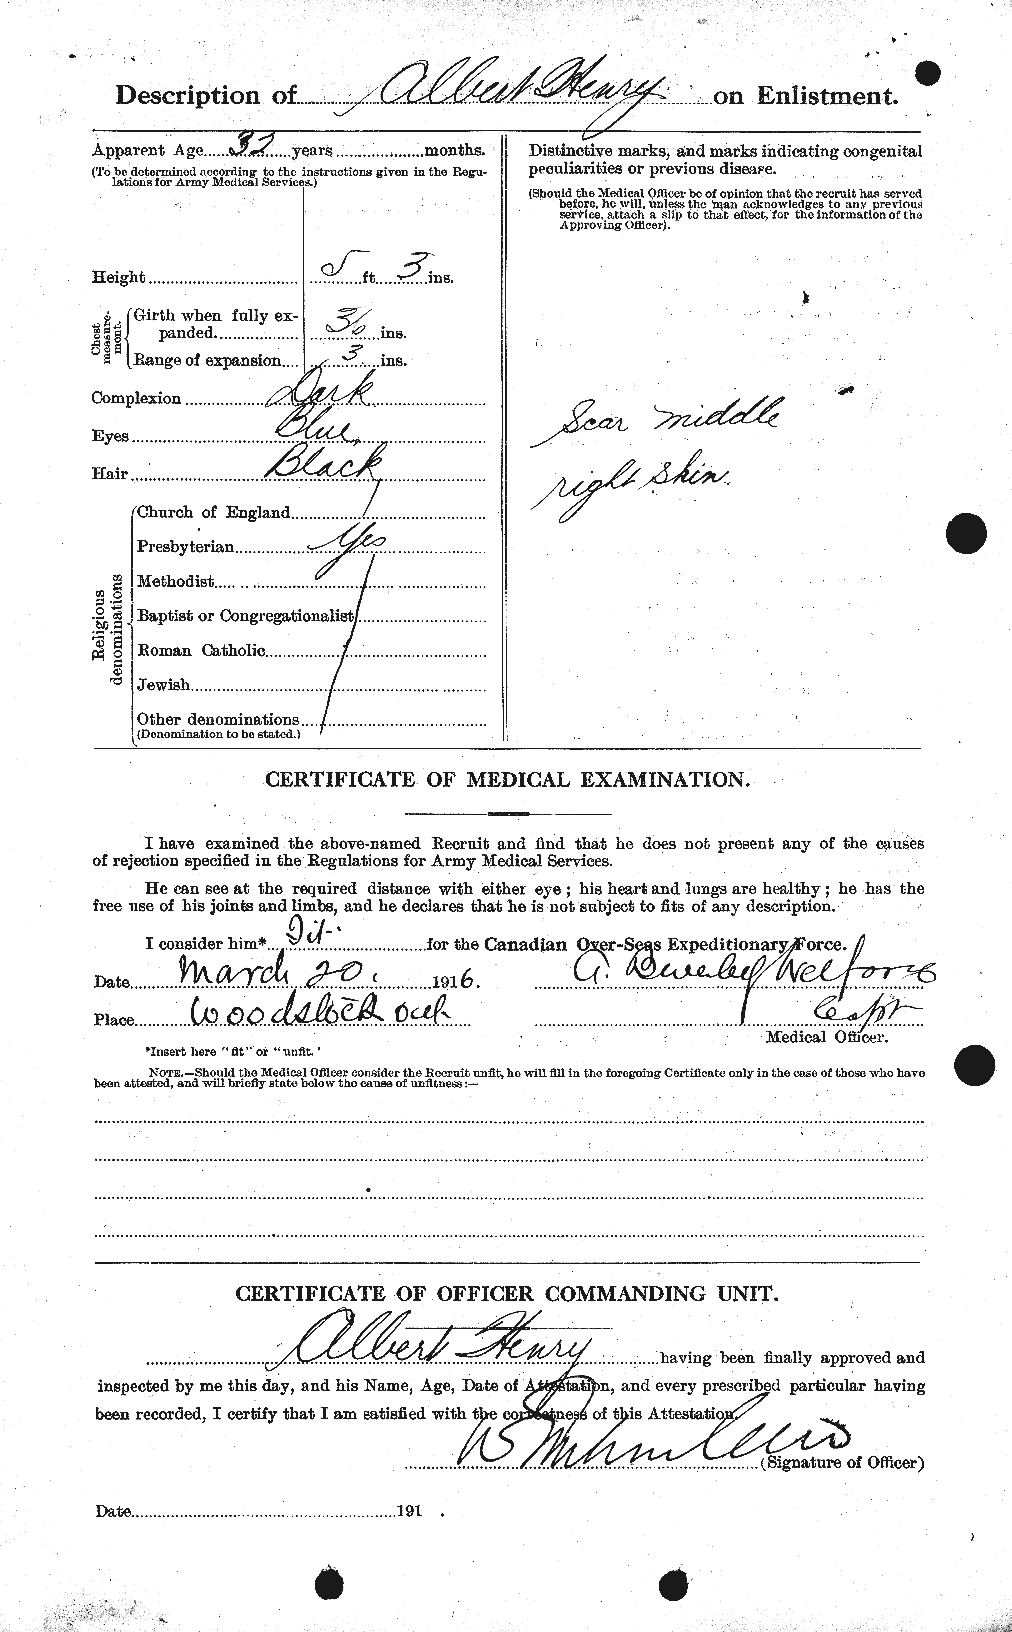 Personnel Records of the First World War - CEF 391647b